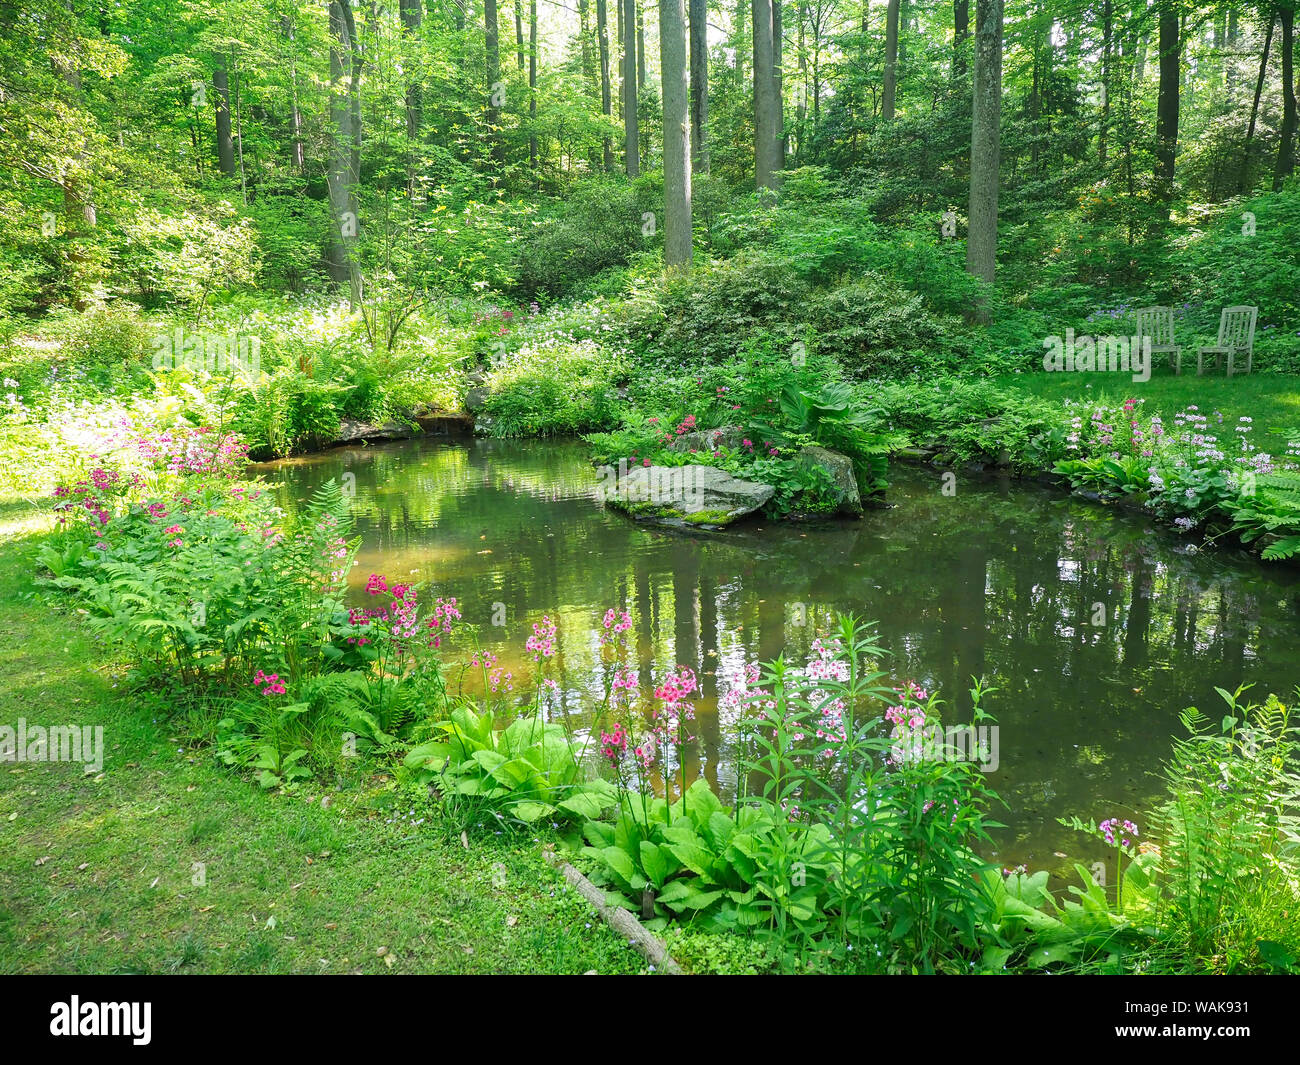 USA, Delaware. A pond surrounded by a field of wildflowers. Stock Photo